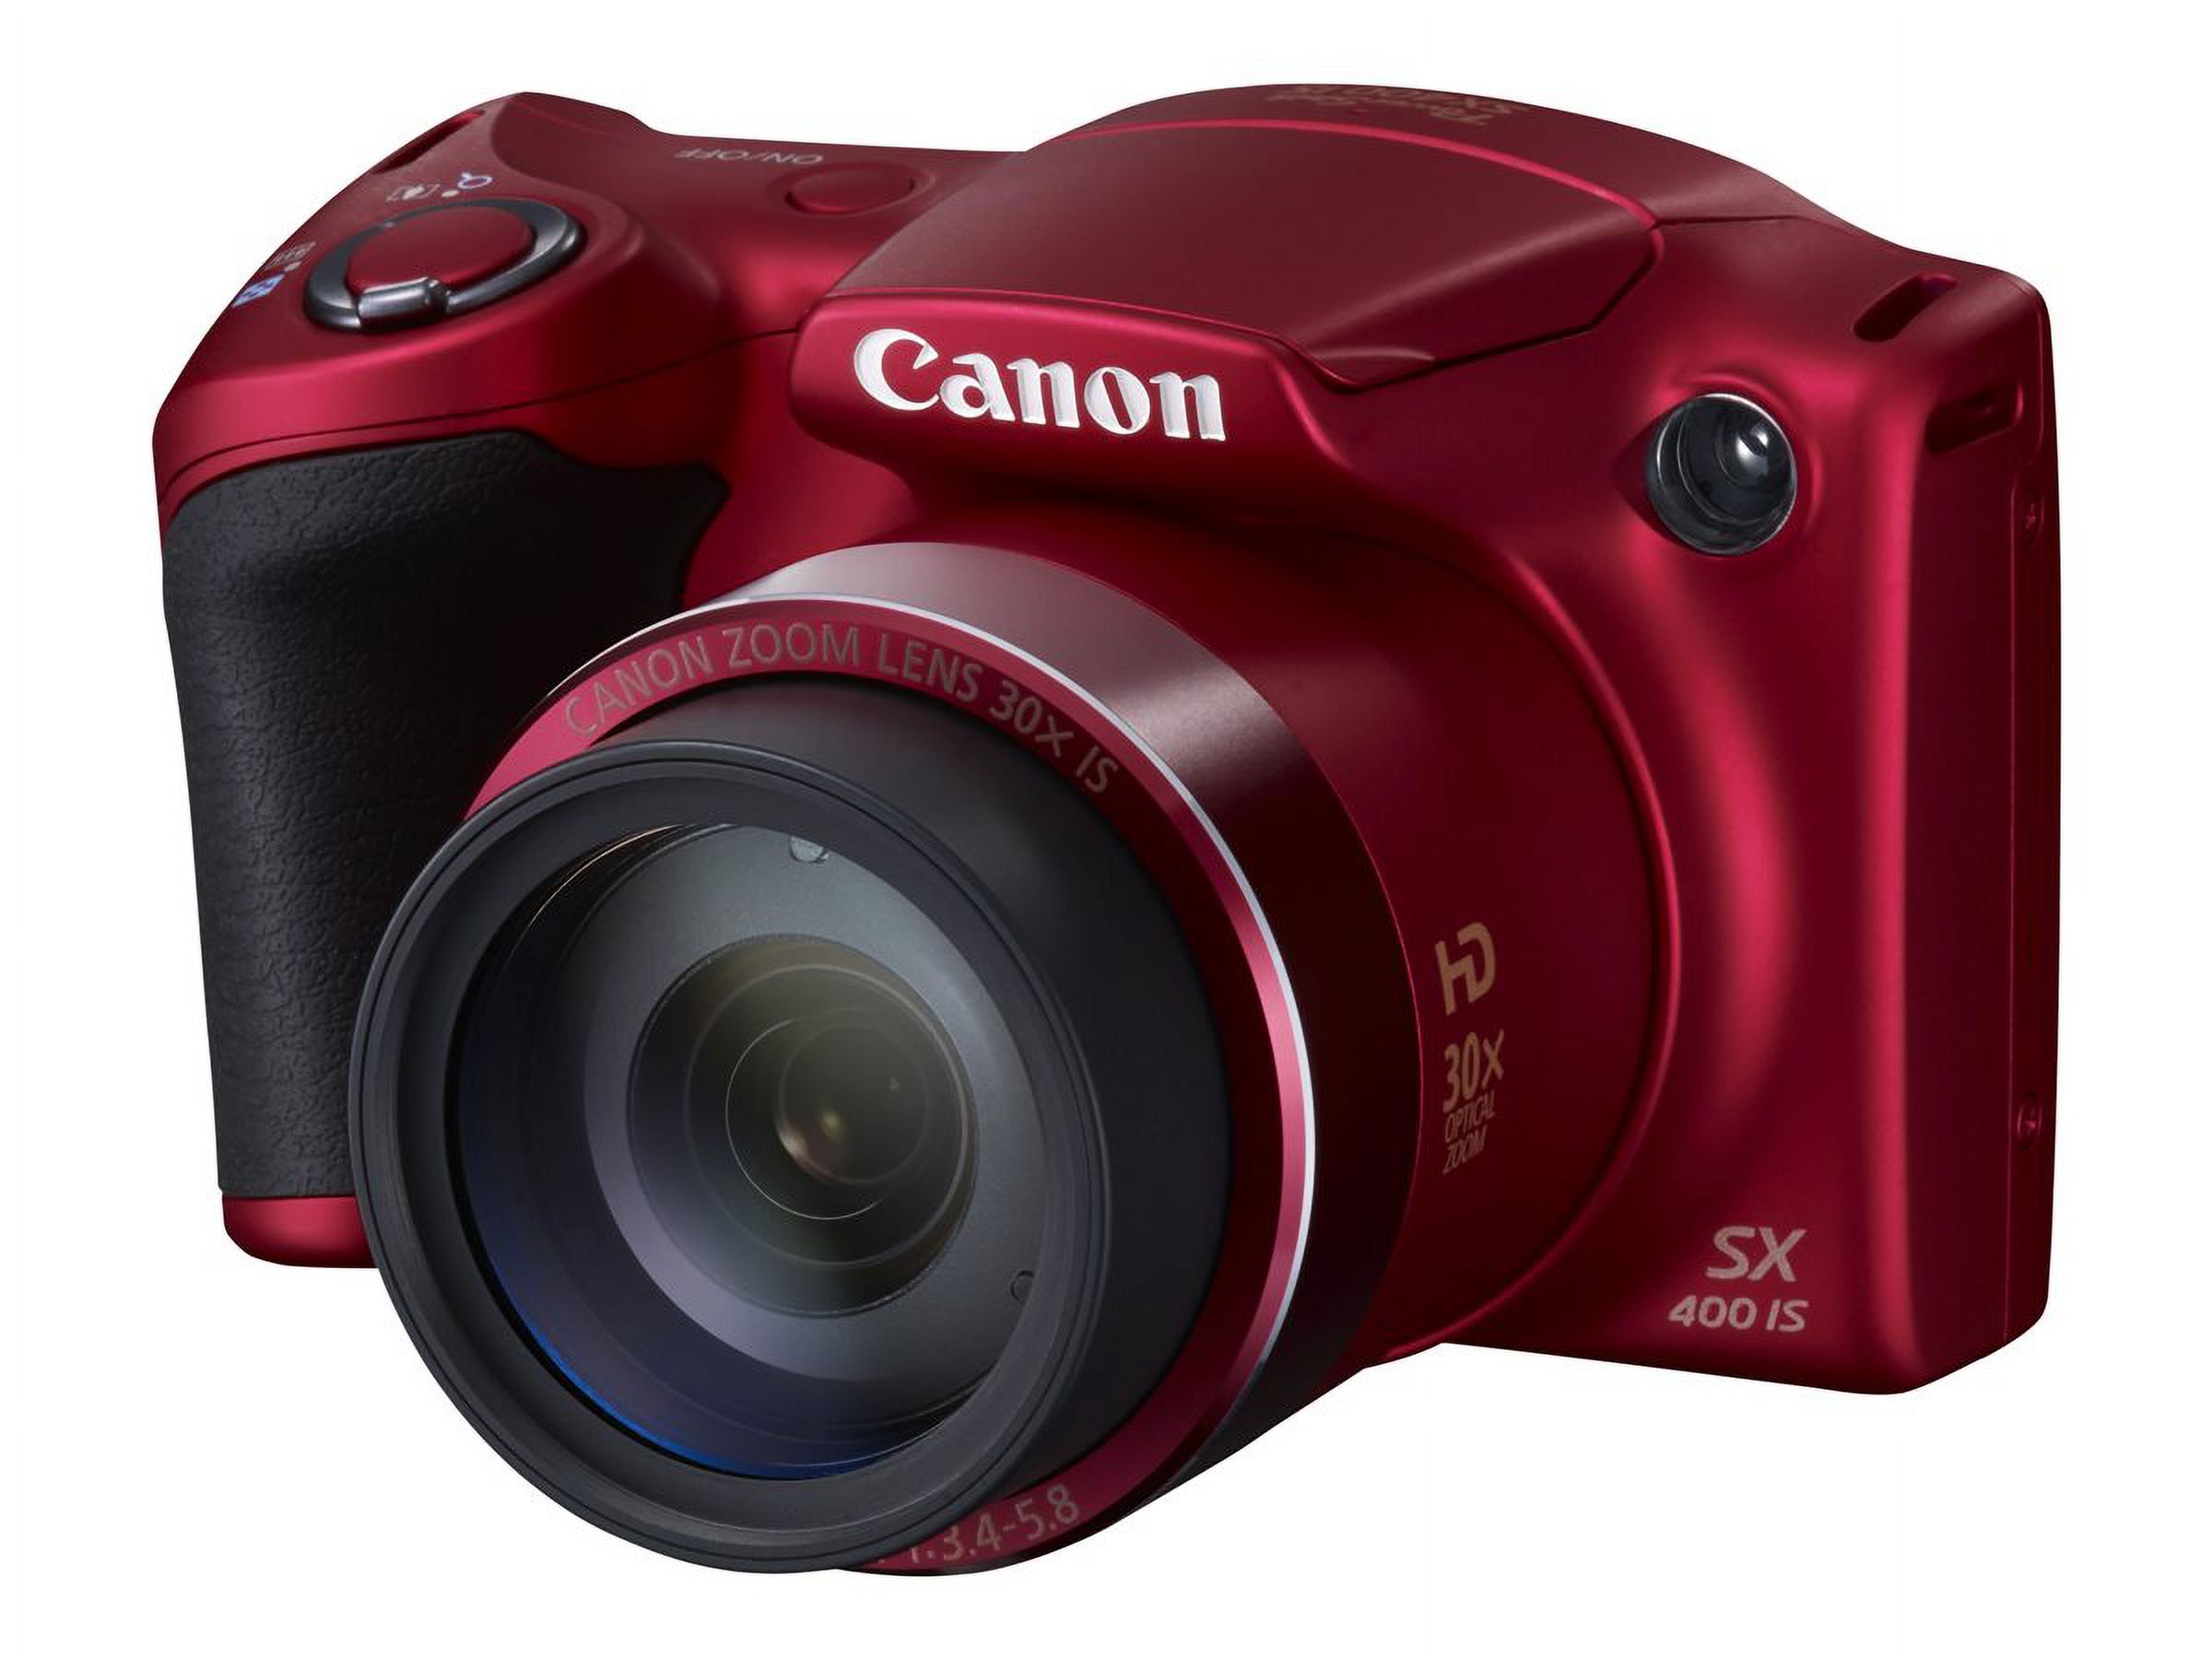 Canon PowerShot SX400 IS - Digital camera - High Definition - compact - 16.0 MP - 30 x optical zoom - red - image 18 of 72